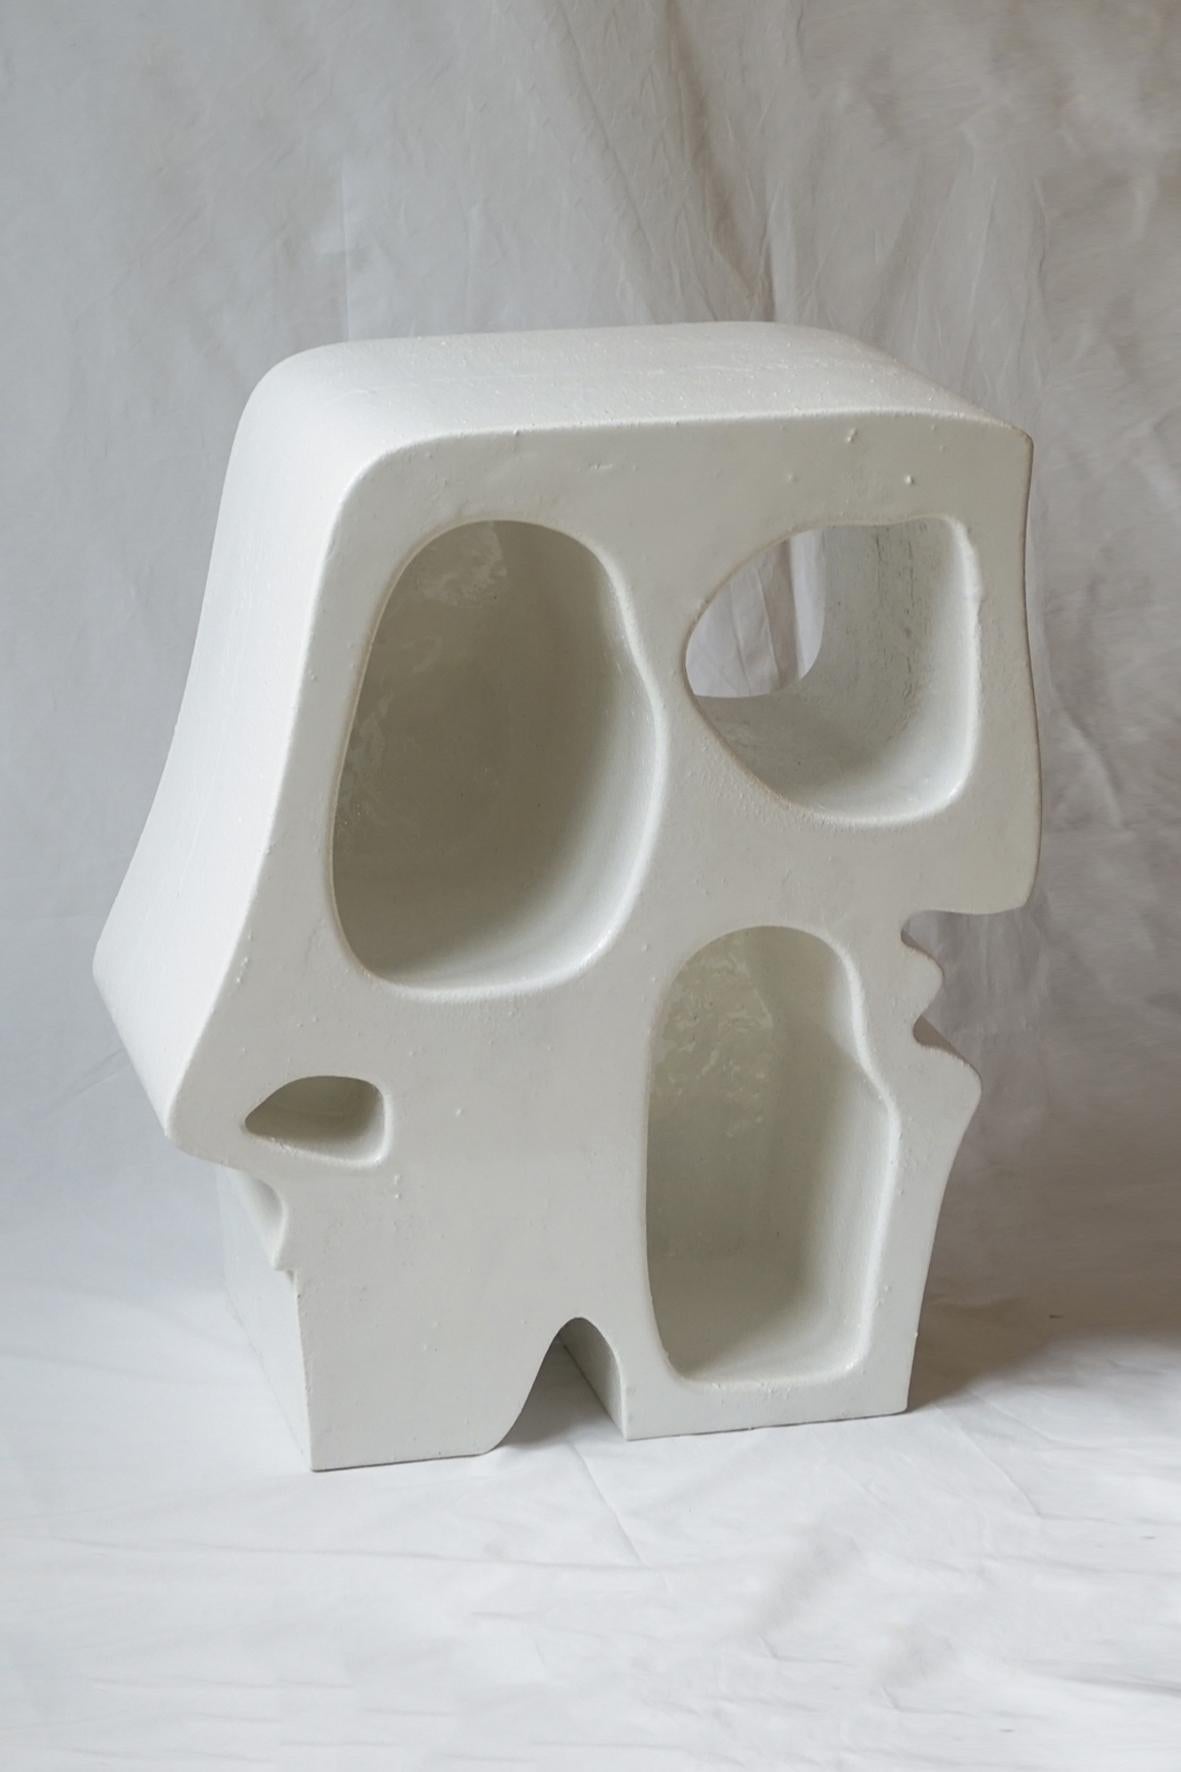 Single spectator by Freia Achenbach
Limited Edition of 25
Dimensions: D 58 x W 33 cm x H 68 cm
Materials: resin, sand, foam

The Single Spectator is part of the Spectator Shelf family, which is characterized by its amorphous shapes which at